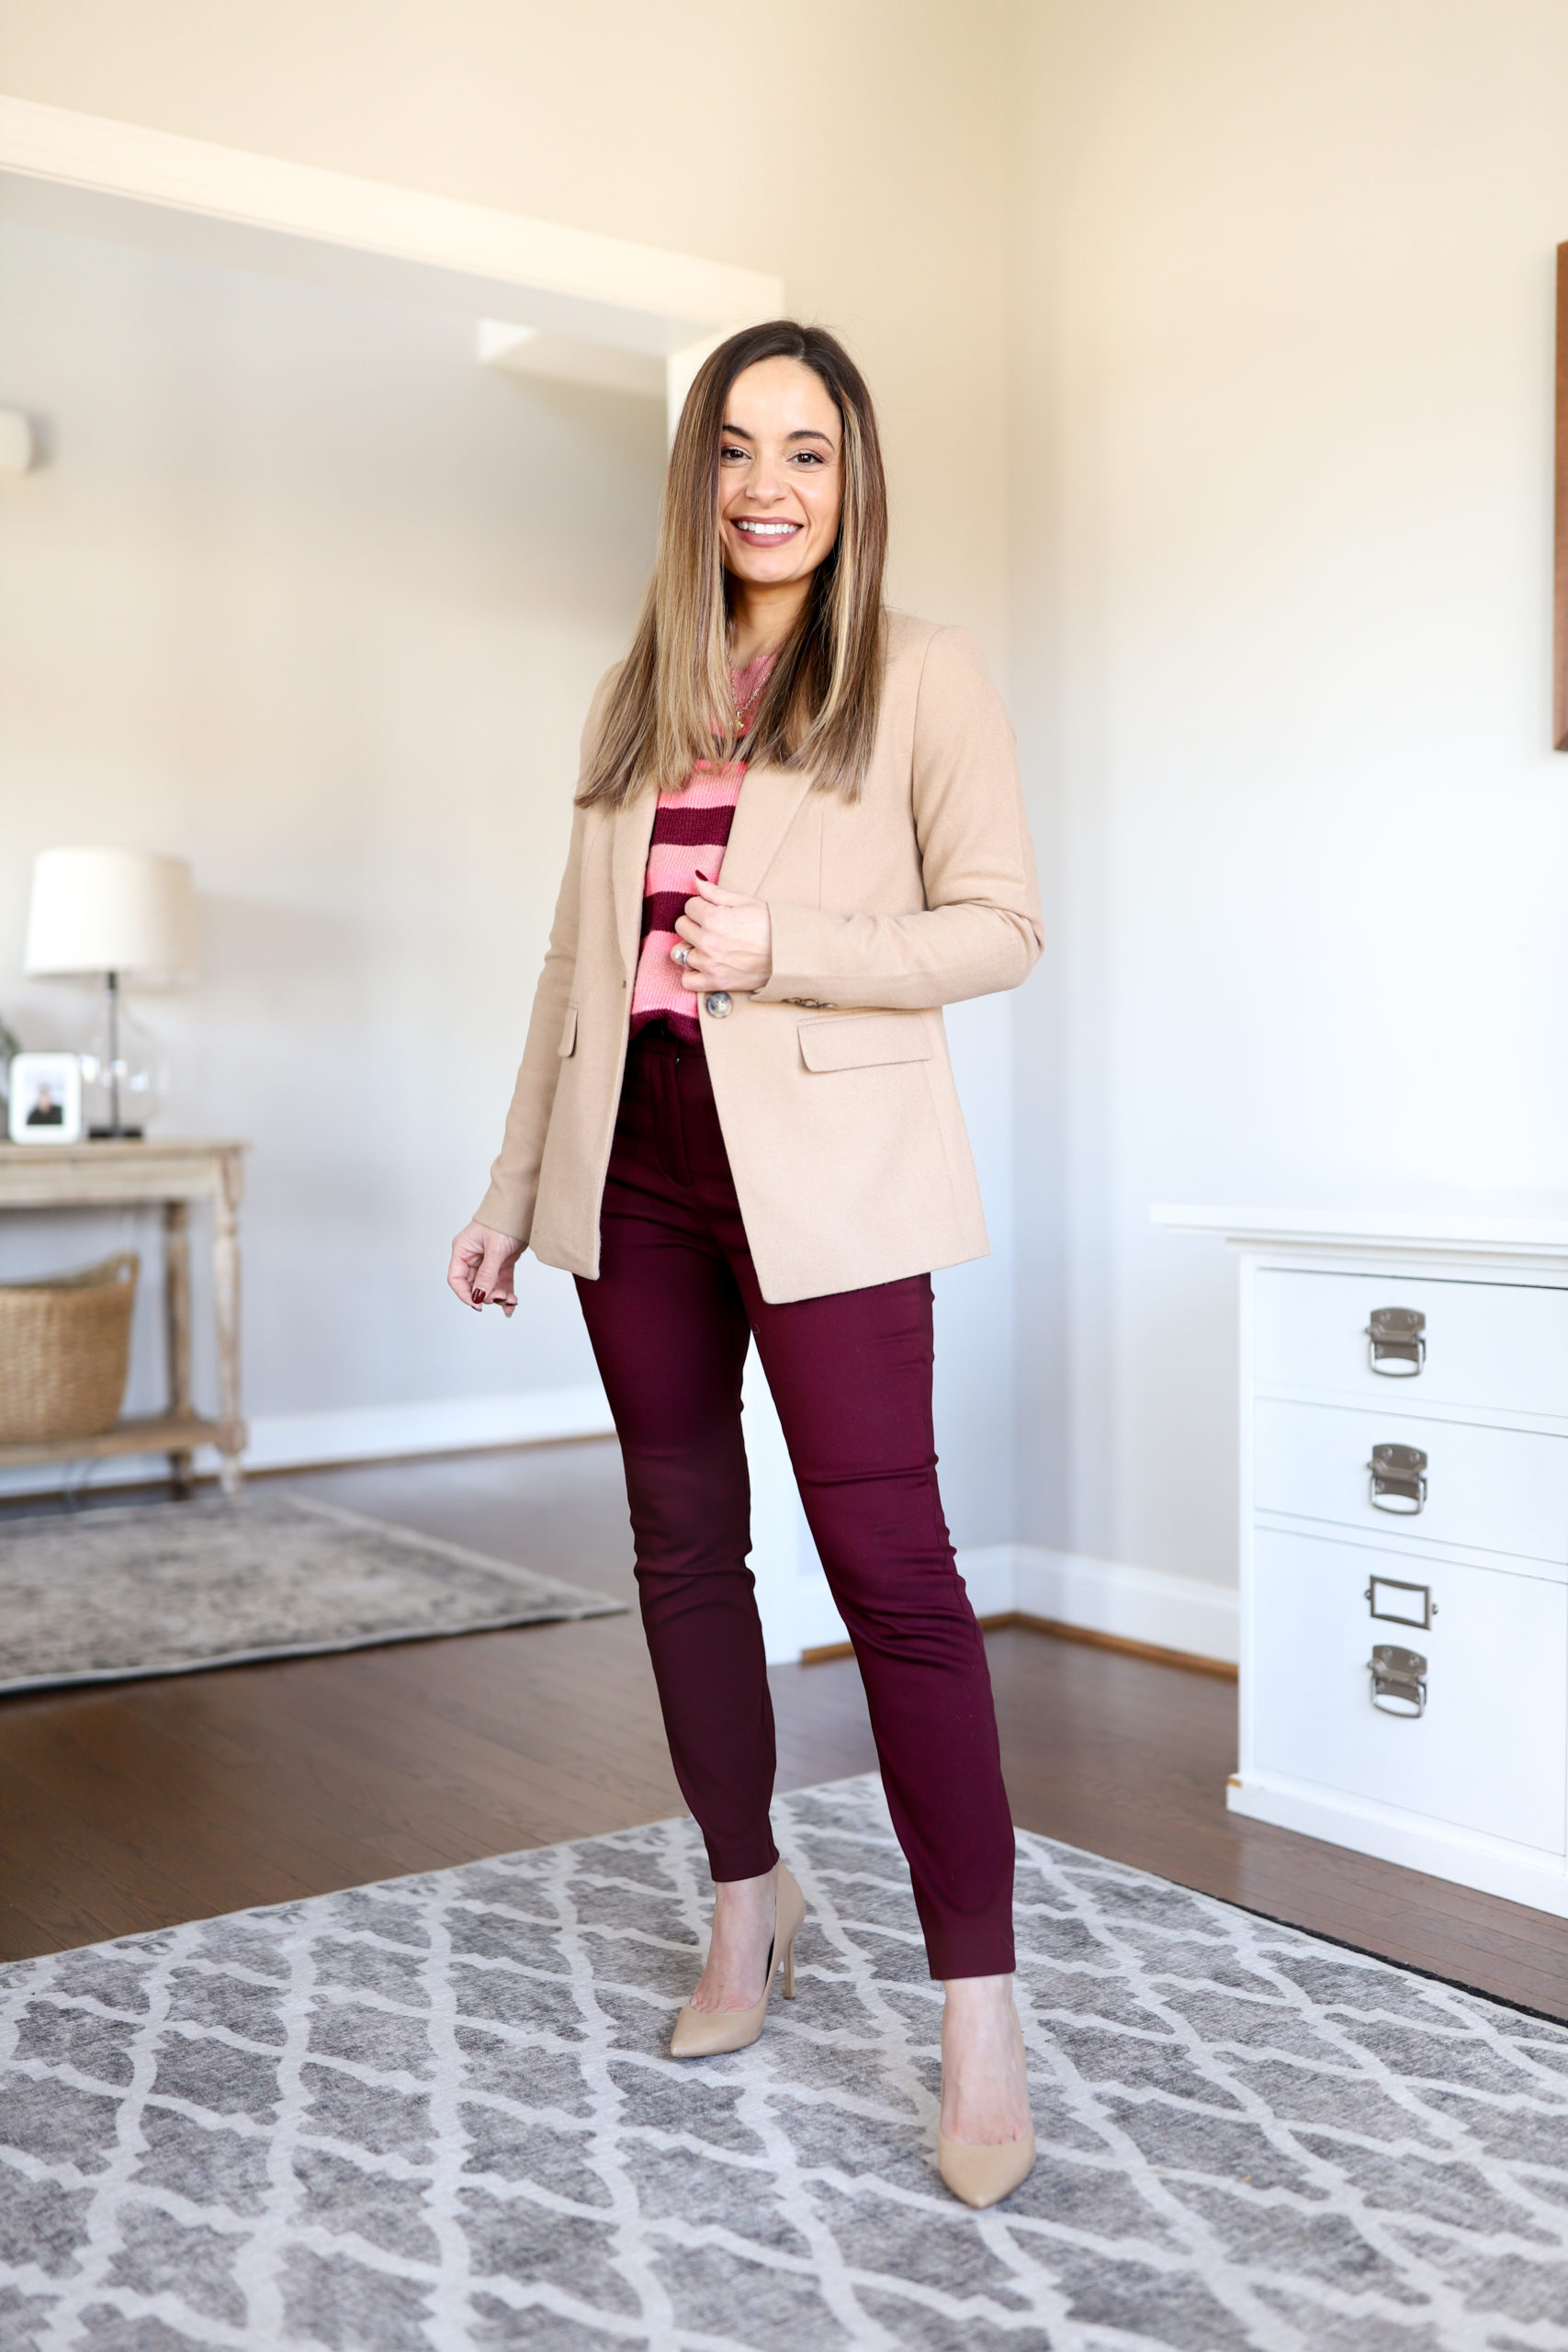 burgundy tights, black dress and boots  Career outfits, Fall dress outfit,  Casual winter outfits